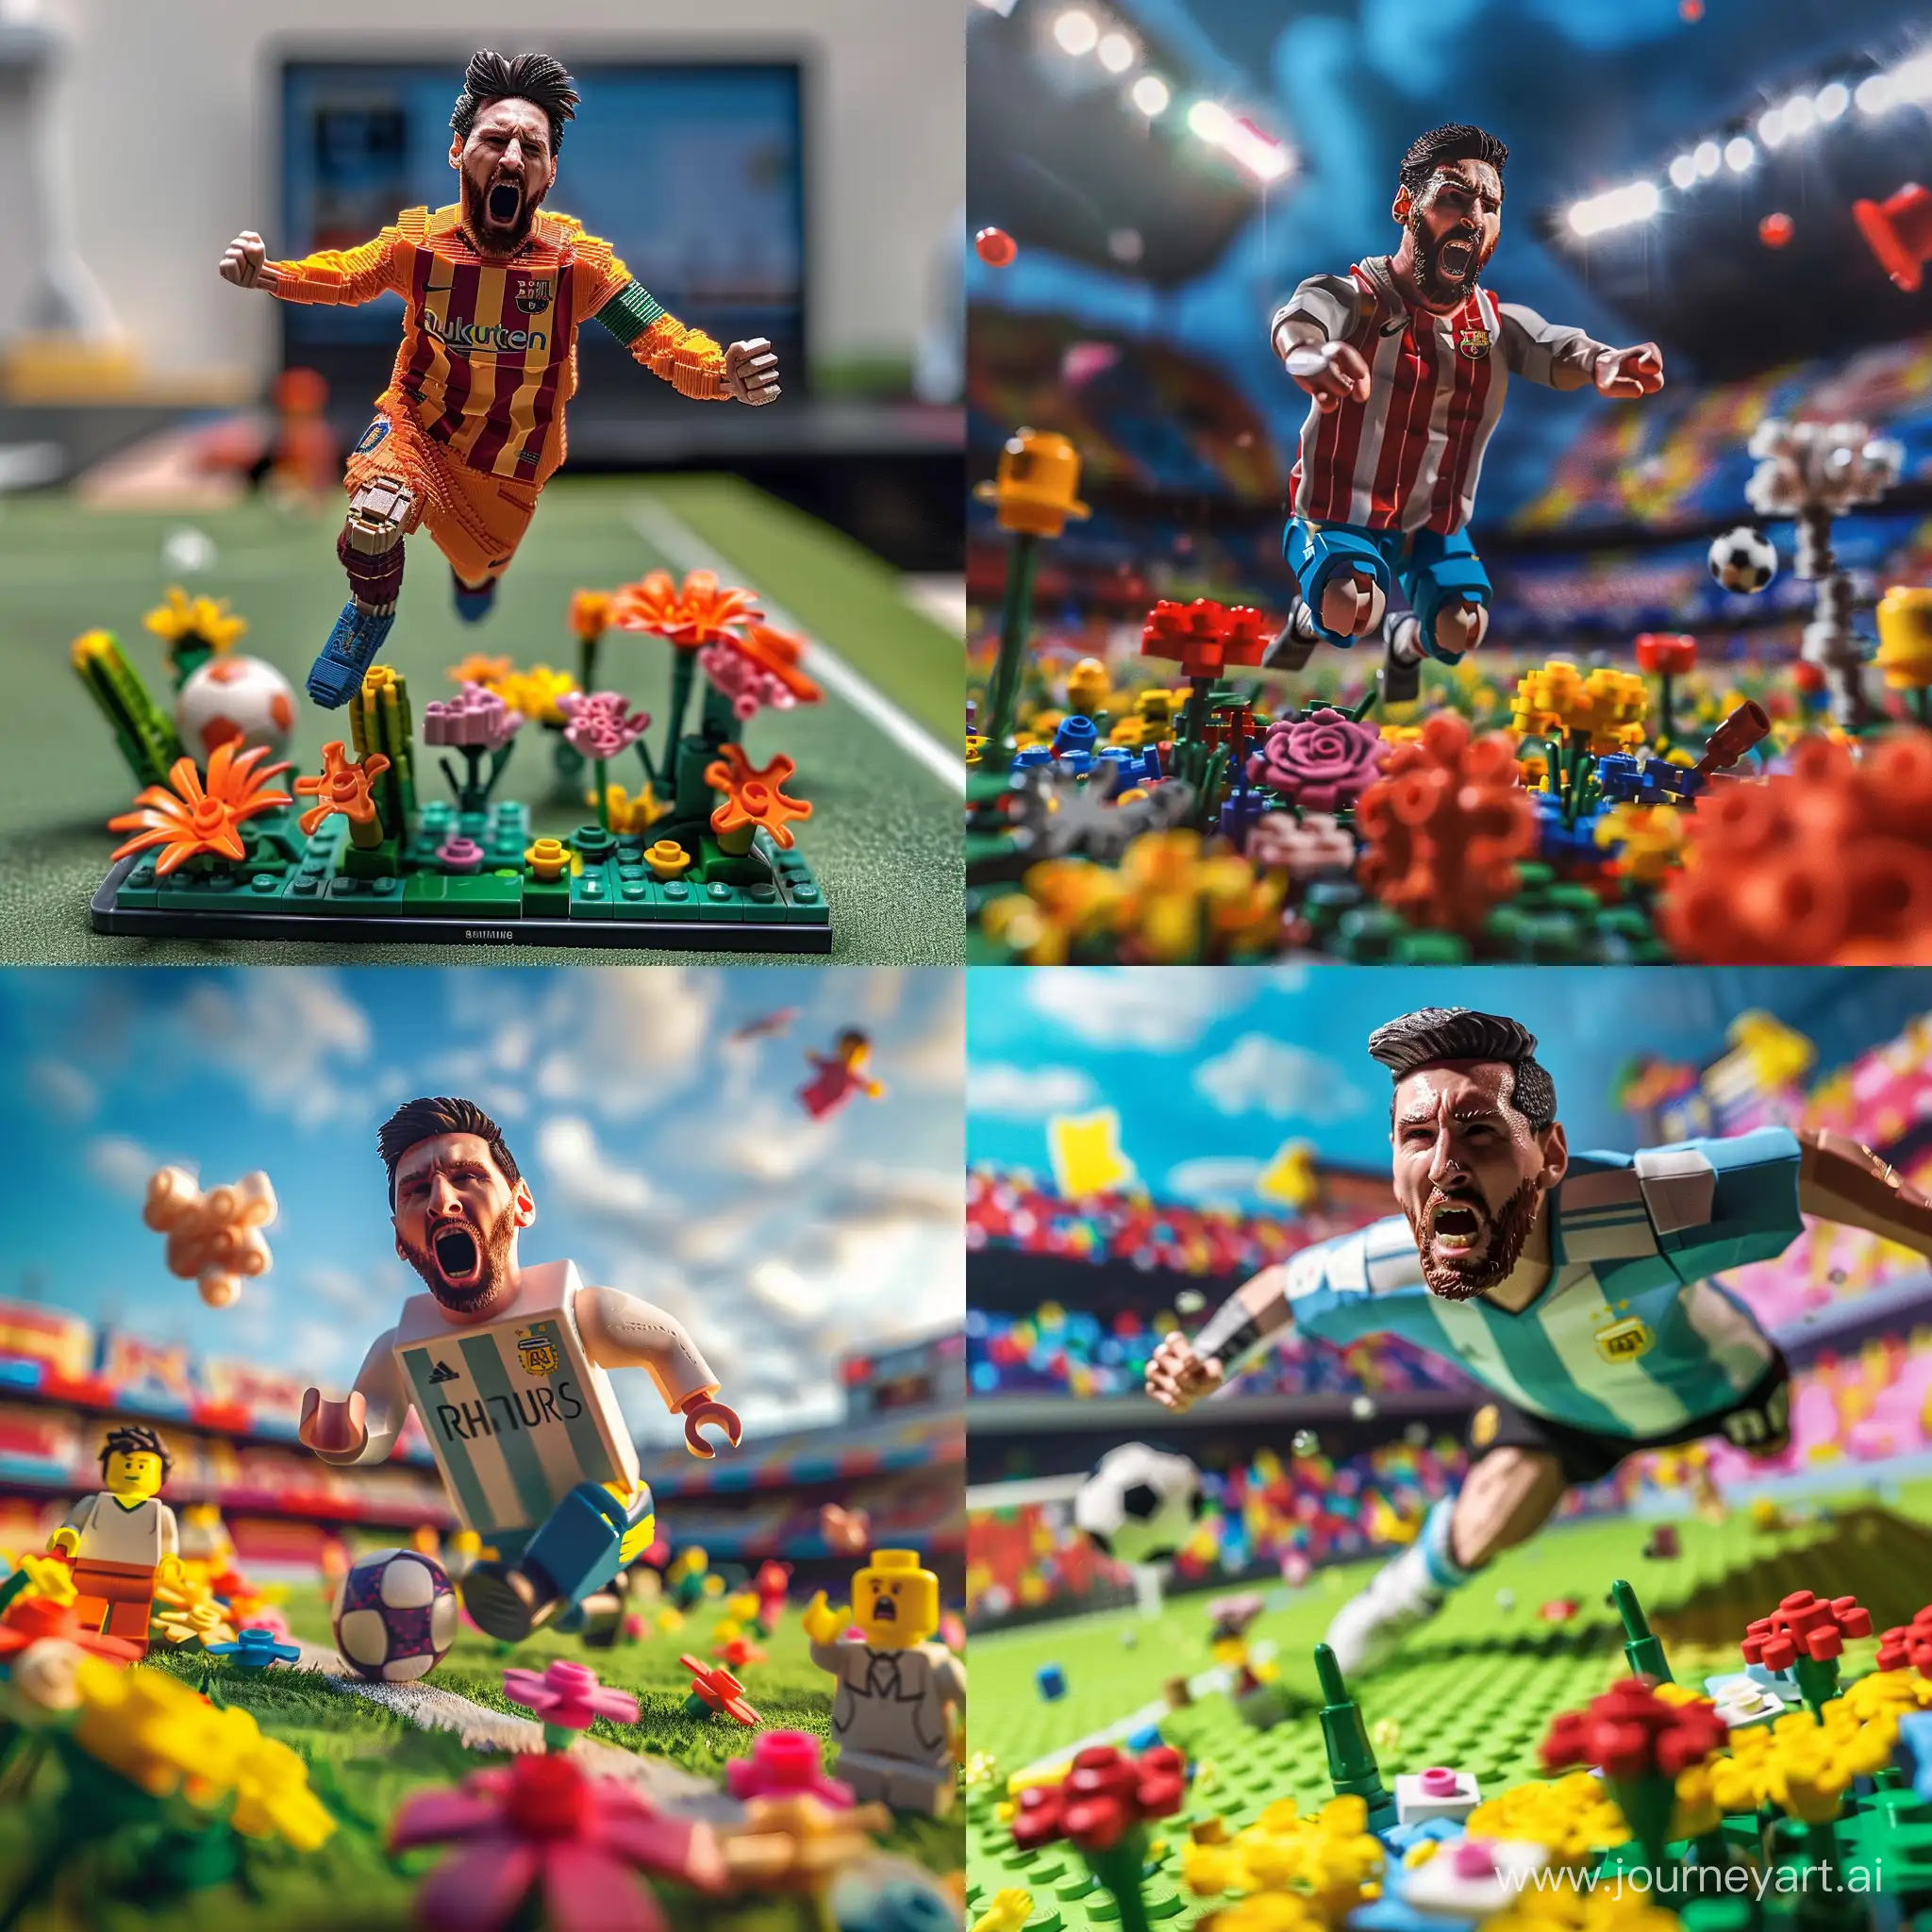 Angry-Messi-Jumping-on-Lego-Flowers-on-Football-Pitch